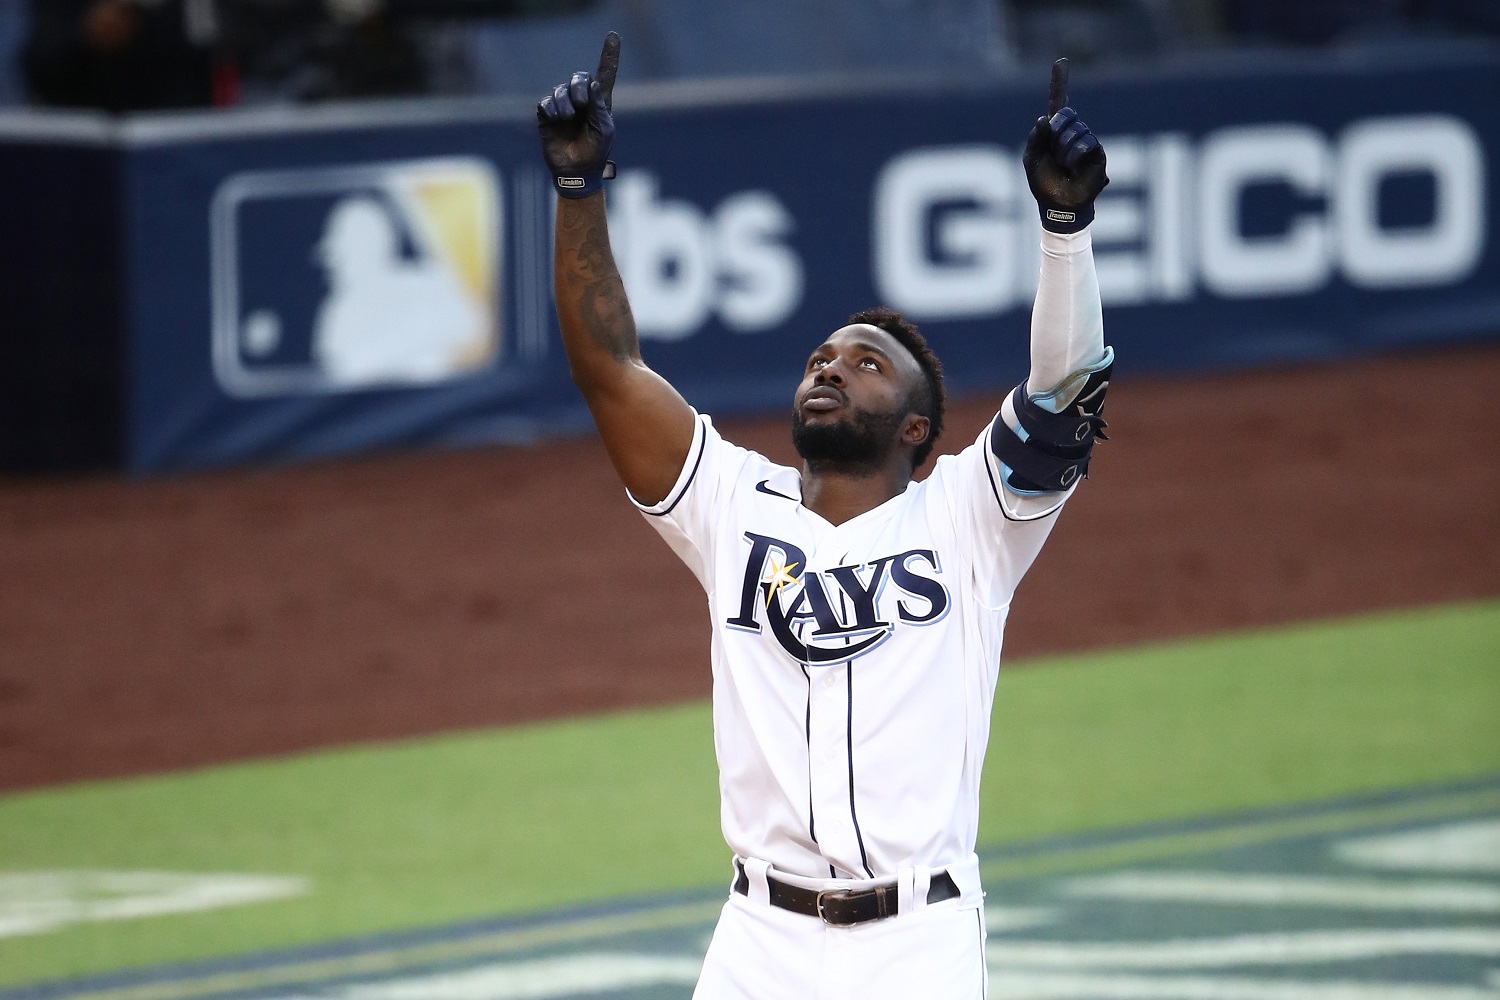 ALCS MVP Randy Arozarena Is the Lowest-Paid Player on the Tampa Bay Rays’ World Series Roster